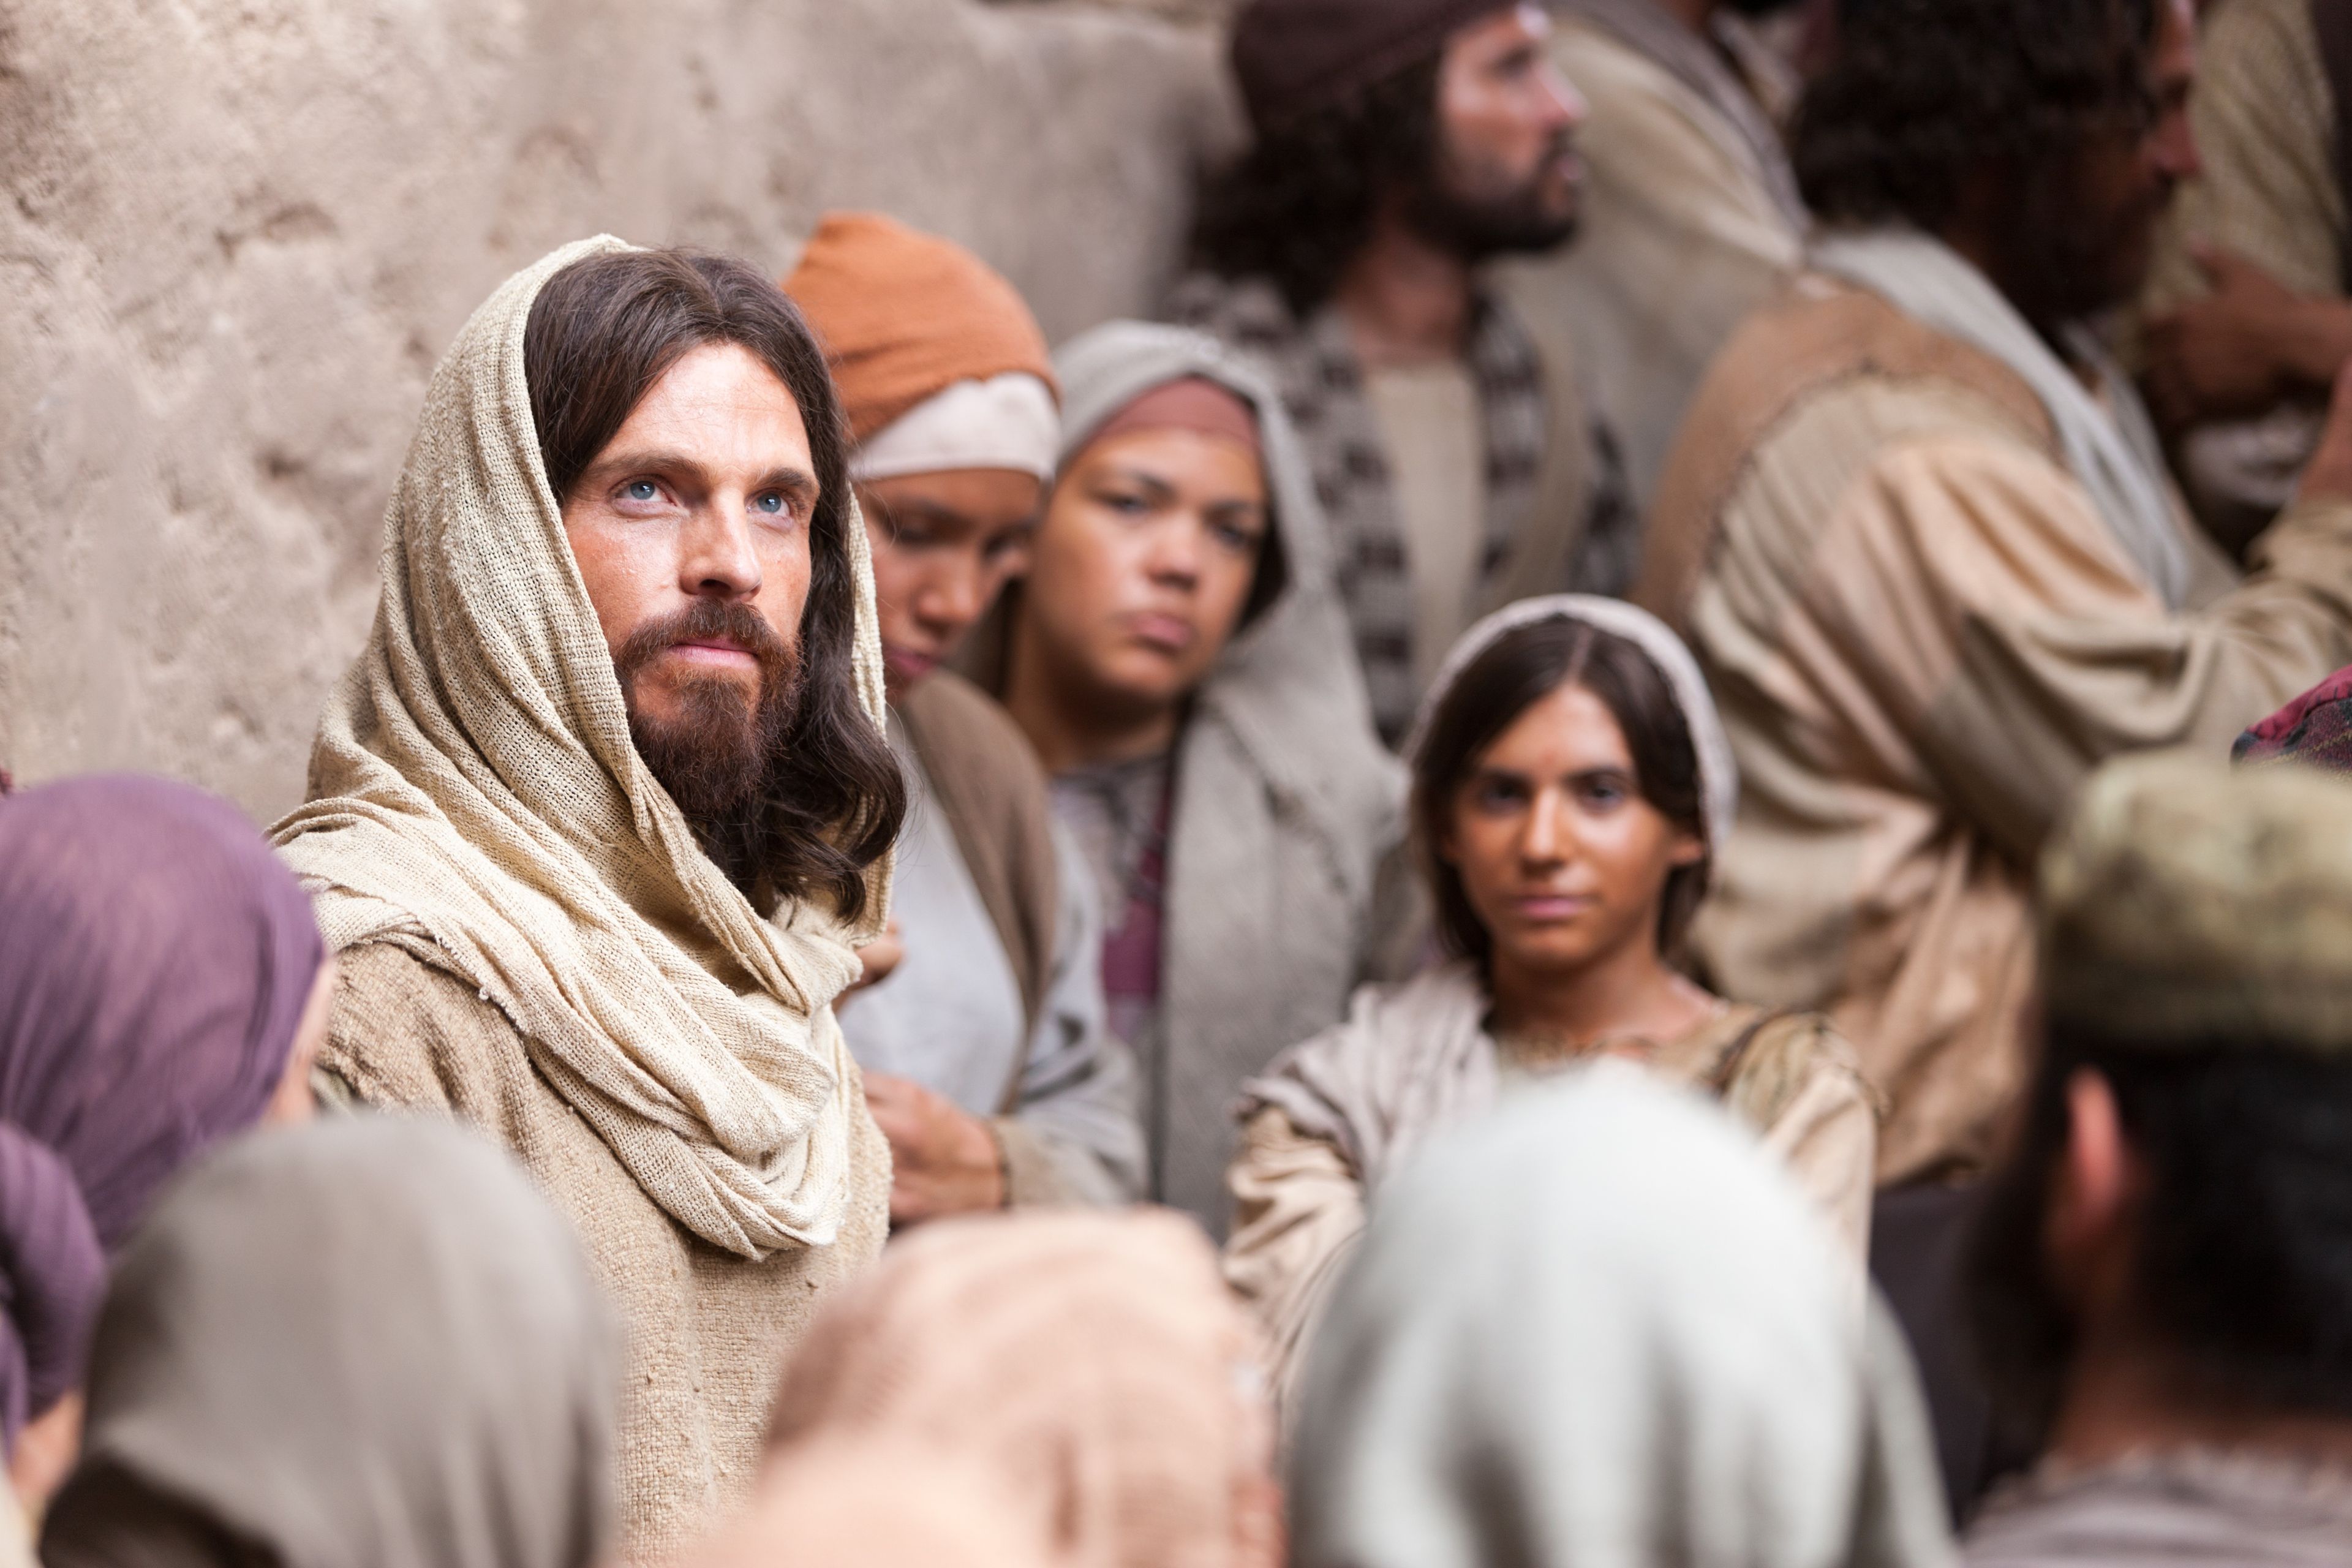 Jesus teaches a group of people, “He that believeth on me hath everlasting life.”